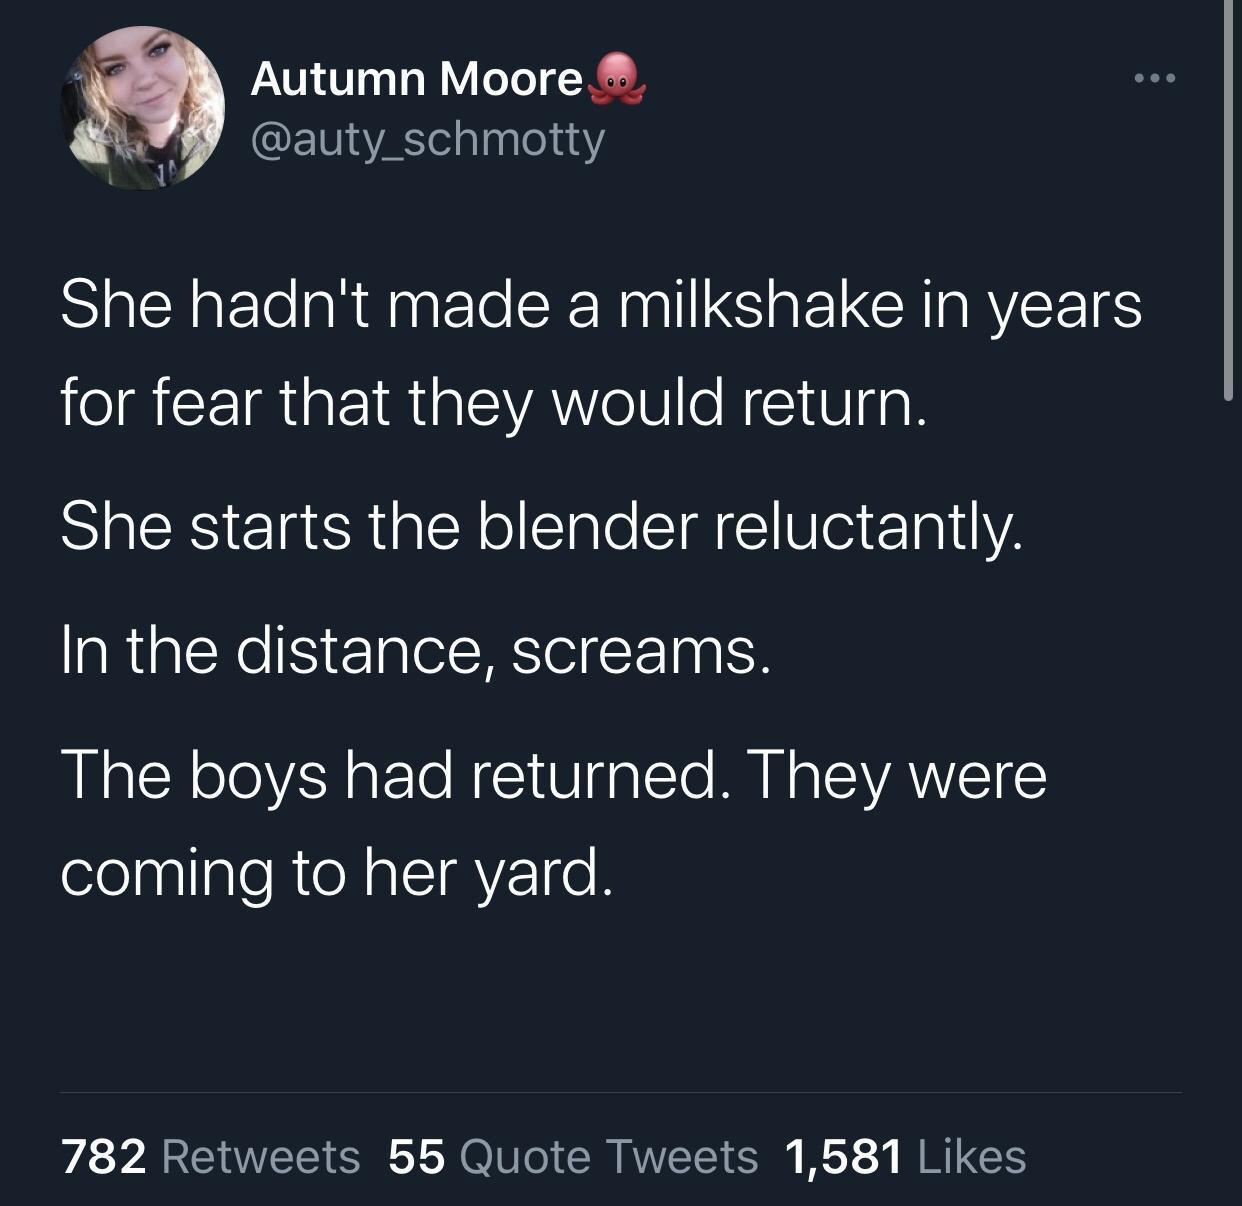 funny memes and pics - quotes broken soul twitter - Autumn Moore She hadn't made a milkshake in years for fear that they would return. She starts the blender reluctantly. In the distance, screams. The boys had returned. They were coming to her yard. 782 5